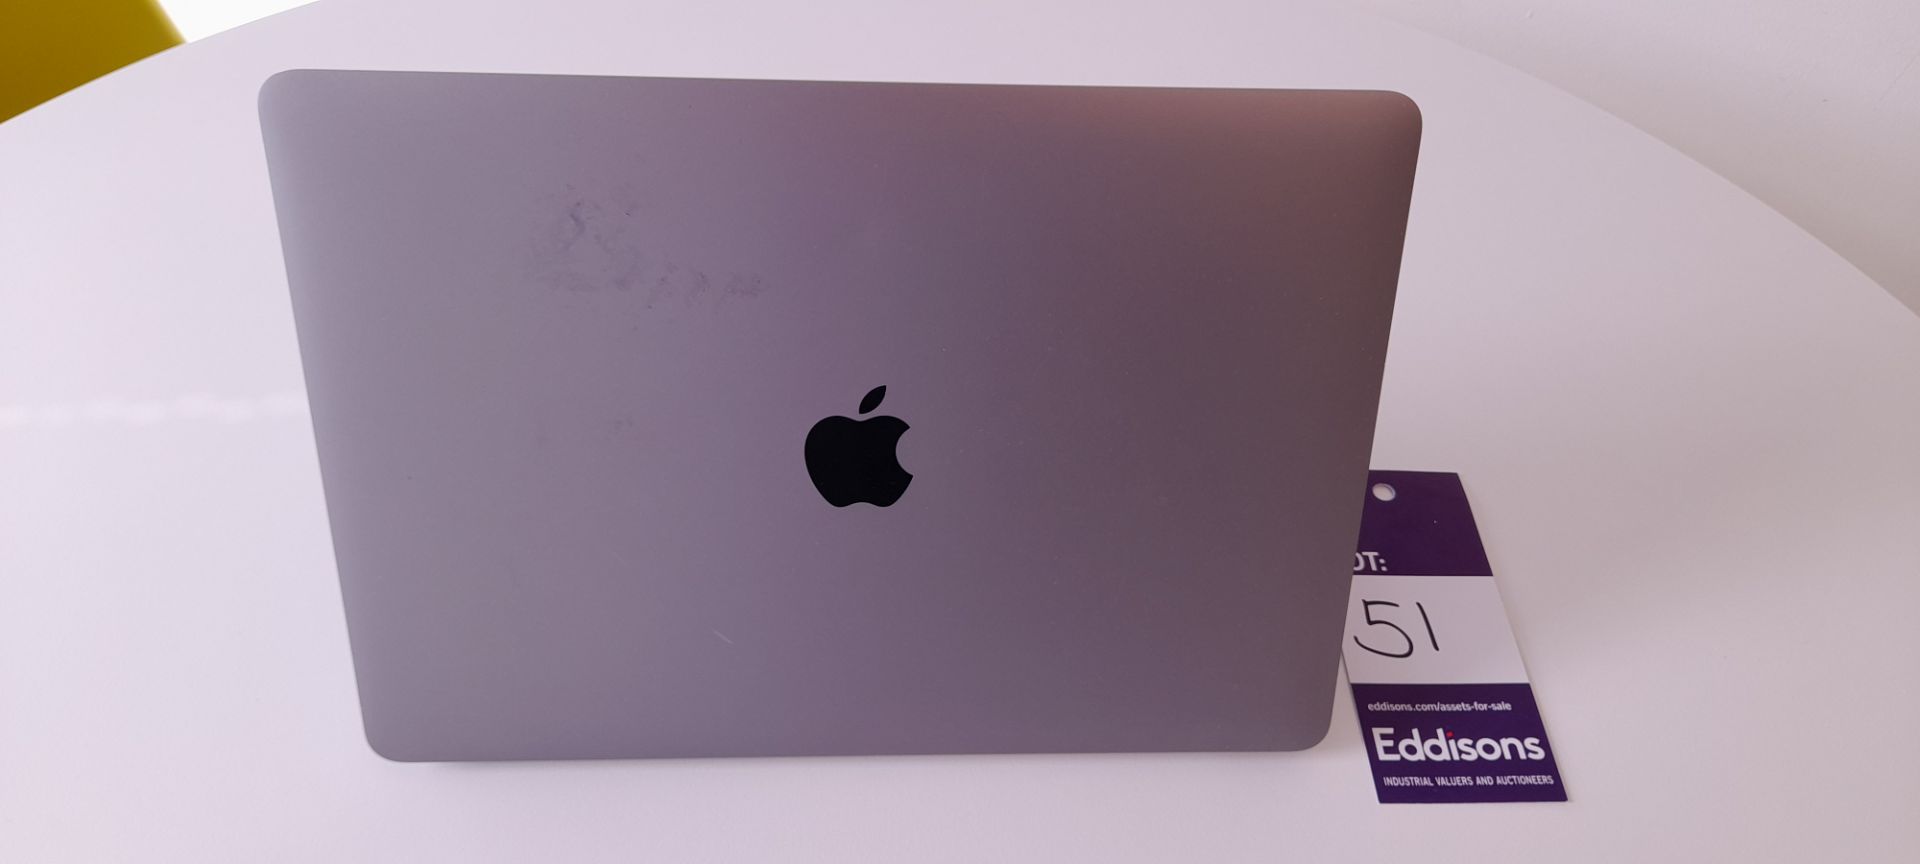 Apple MacBook Air Model A2337 EMC 3598. S/N C02FC92BQ6L4. Collection from Canary Wharf, London, E14 - Image 4 of 7